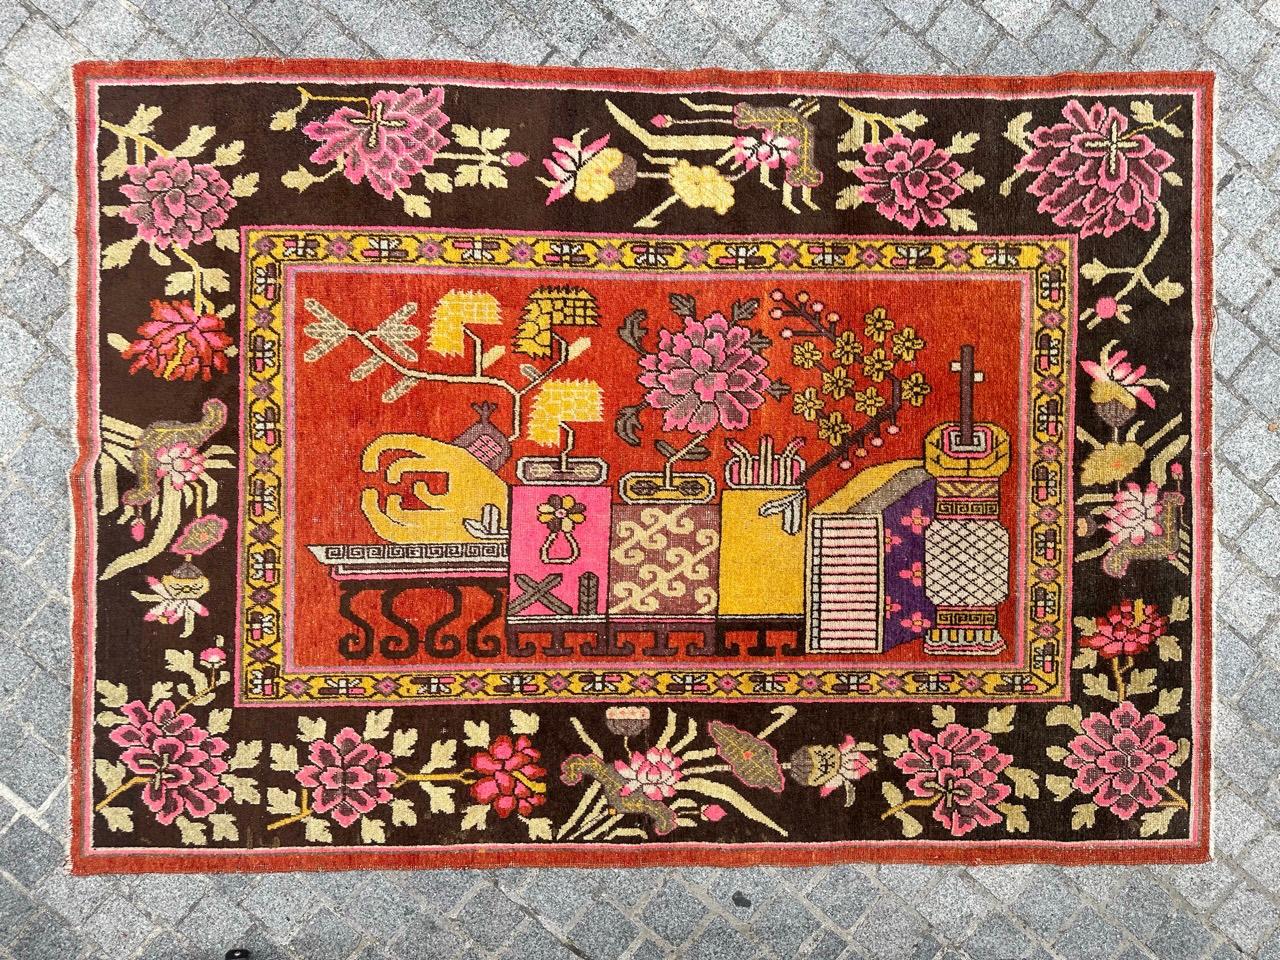 Exquisite Chinese Khotan Rug with Central Figurative Design and Floral Vases. There’s a decorative stool, adorned with vases of flowers in shades of pink, yellow, violet, brown, and beige. The stylized vases exhibit matching colors, including